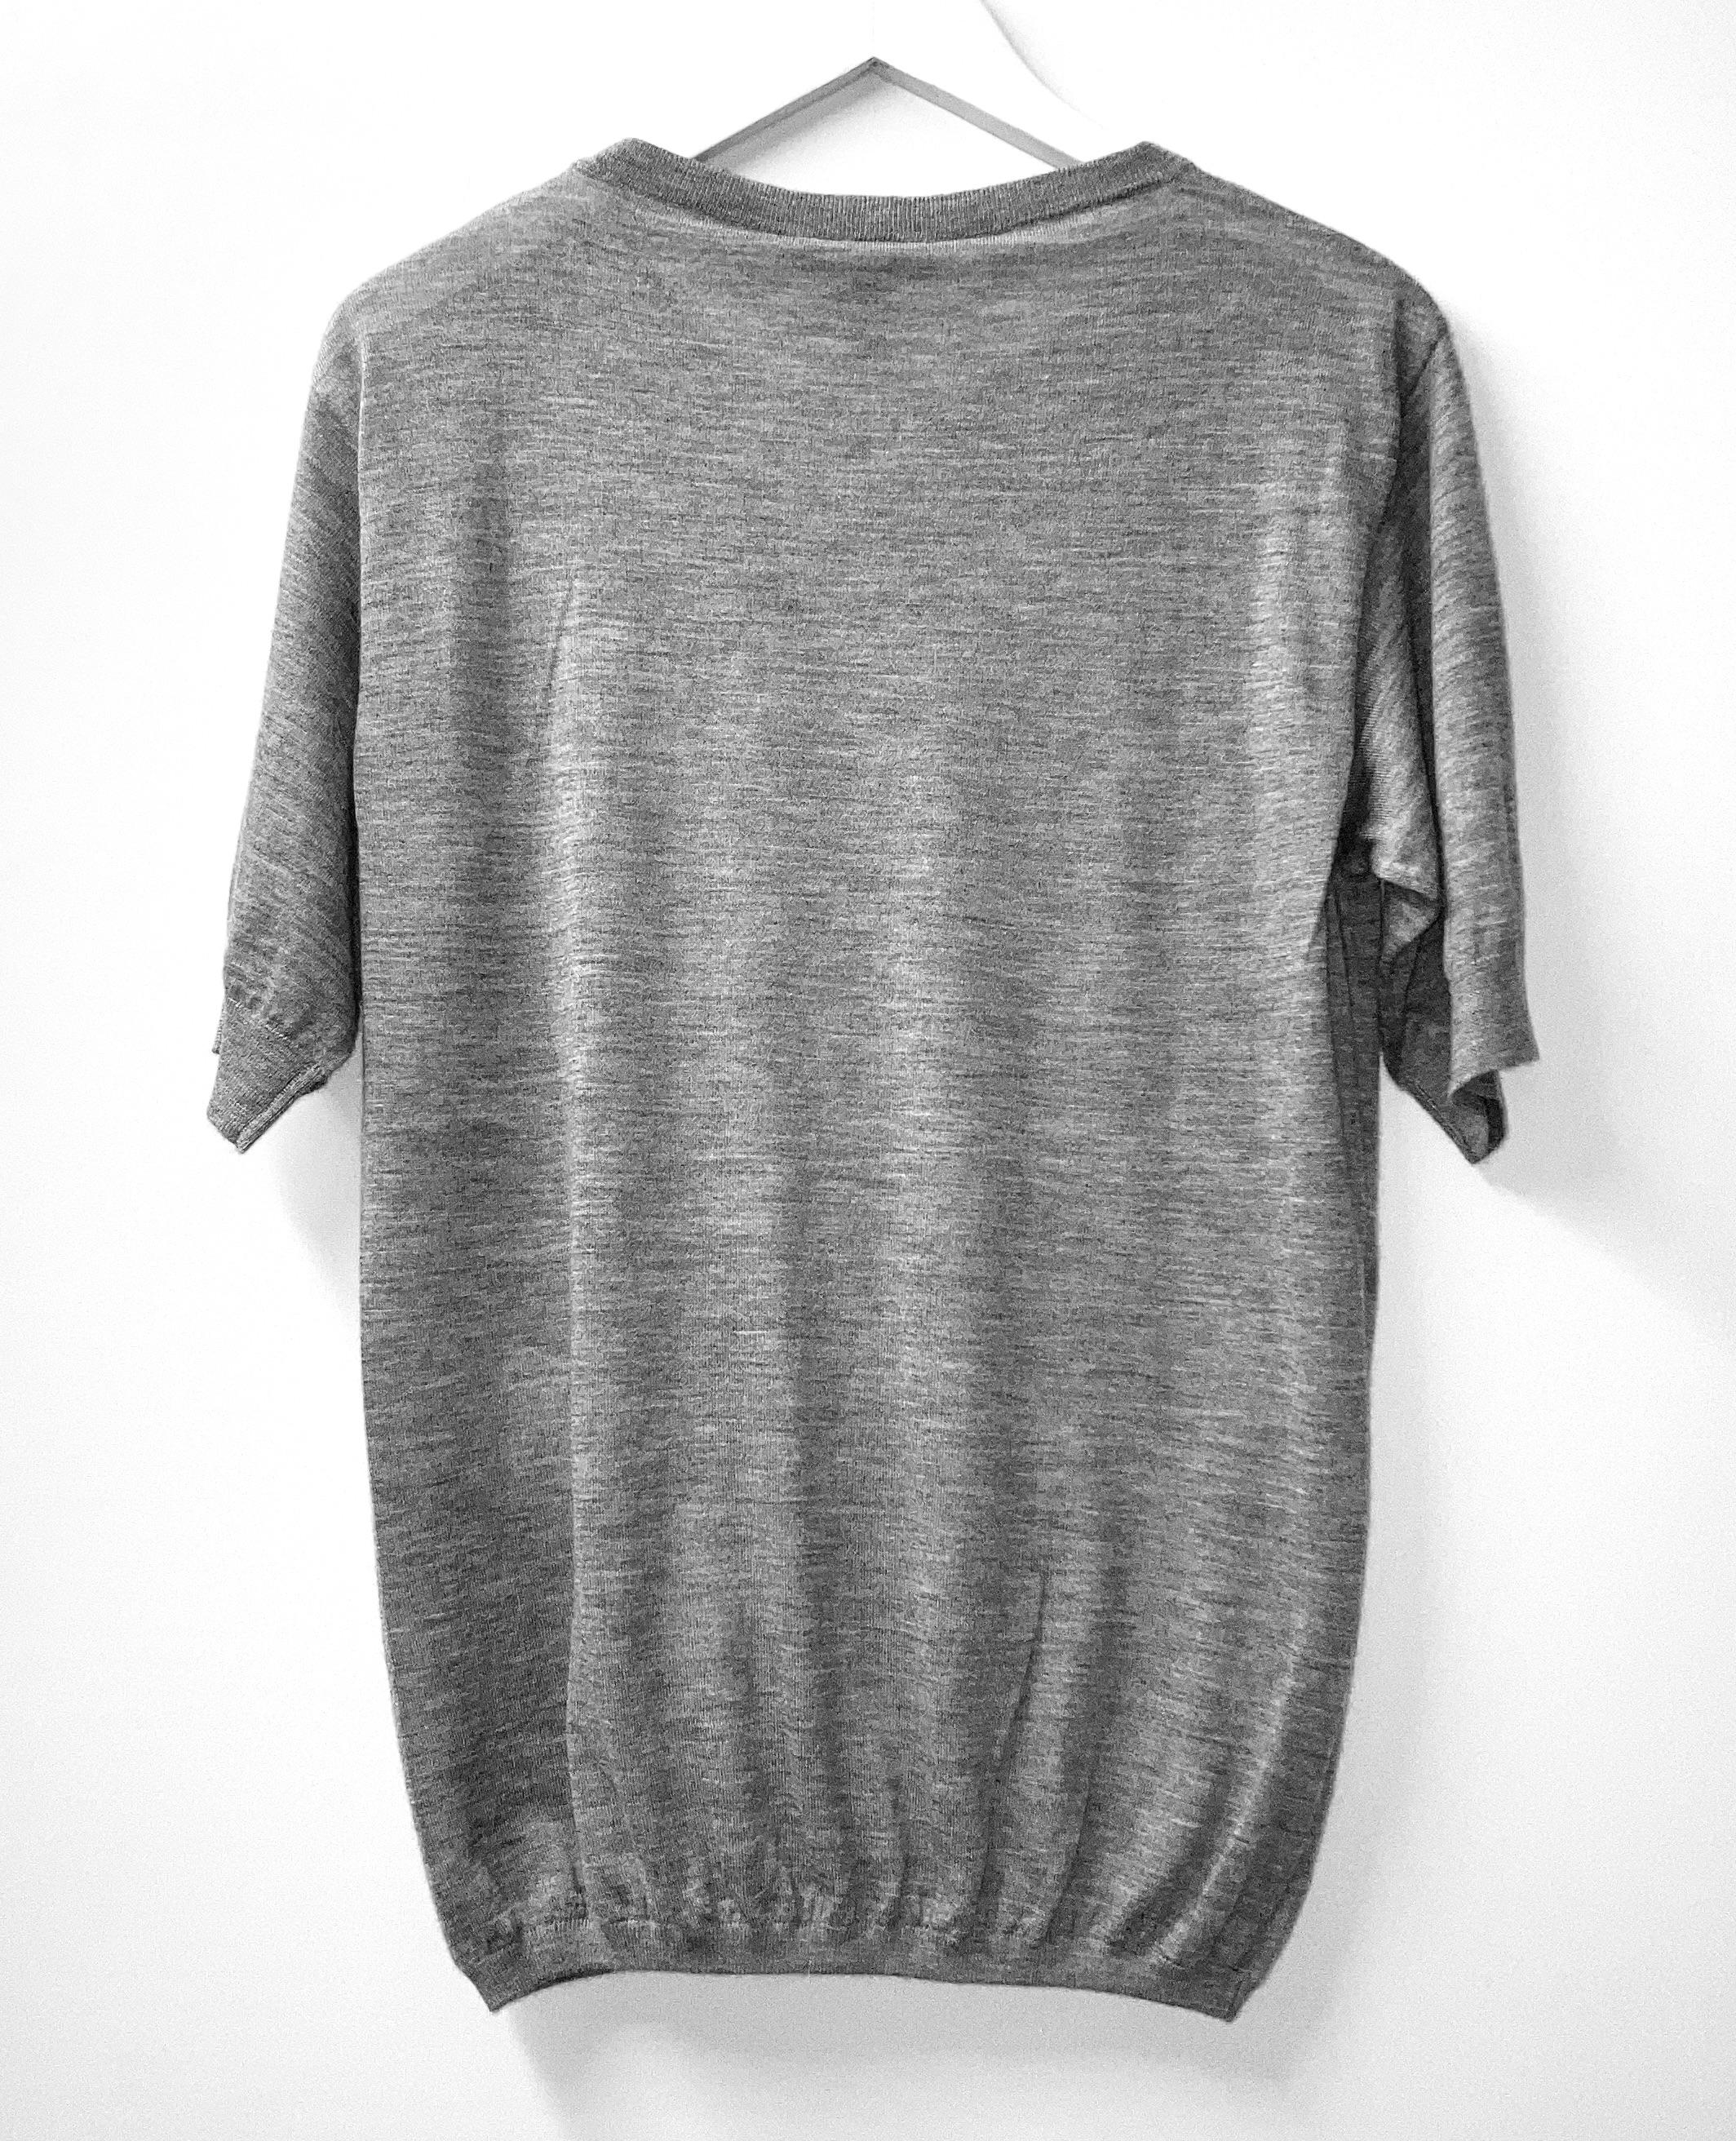 Super luxe short sleeve cashmere sweater from Louis Vuitton - bought for £750 and new with tag. Made from super soft, fine grey marled cashmere with 1% polyamide and elastane. It has ruched ribbed hem, gold LV plaque and rounded neckline. Size XS